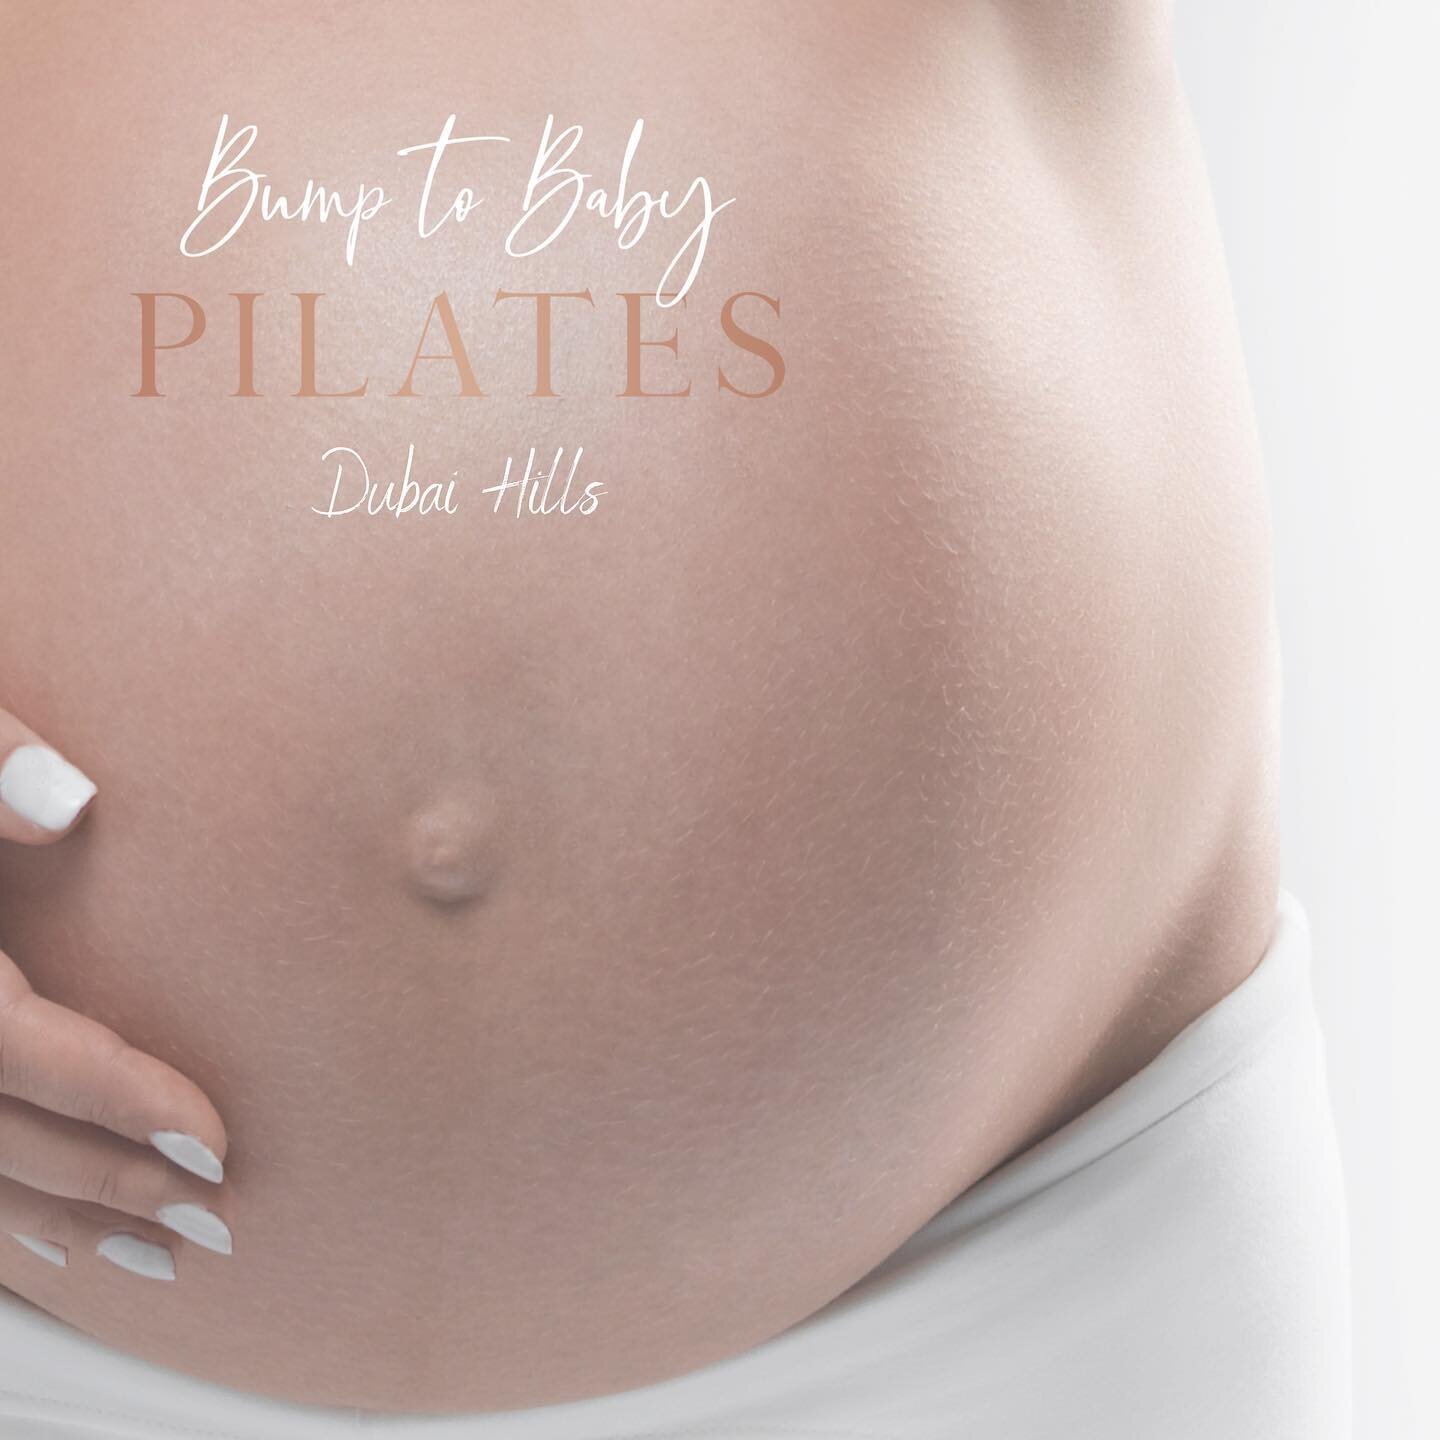 NEW PRENATAL PILATES COURSE DUBAI HILLS

THURSDAY 
12th Jan - 2nd Feb 
6PM 

WHAT WE COVER 
IN CLASS 

Pilates Breathing 
Posture
Core Stability &amp; Strength
Support Pelvic Floor 

Mums have described feeling fit &amp; strong for birth and have fel